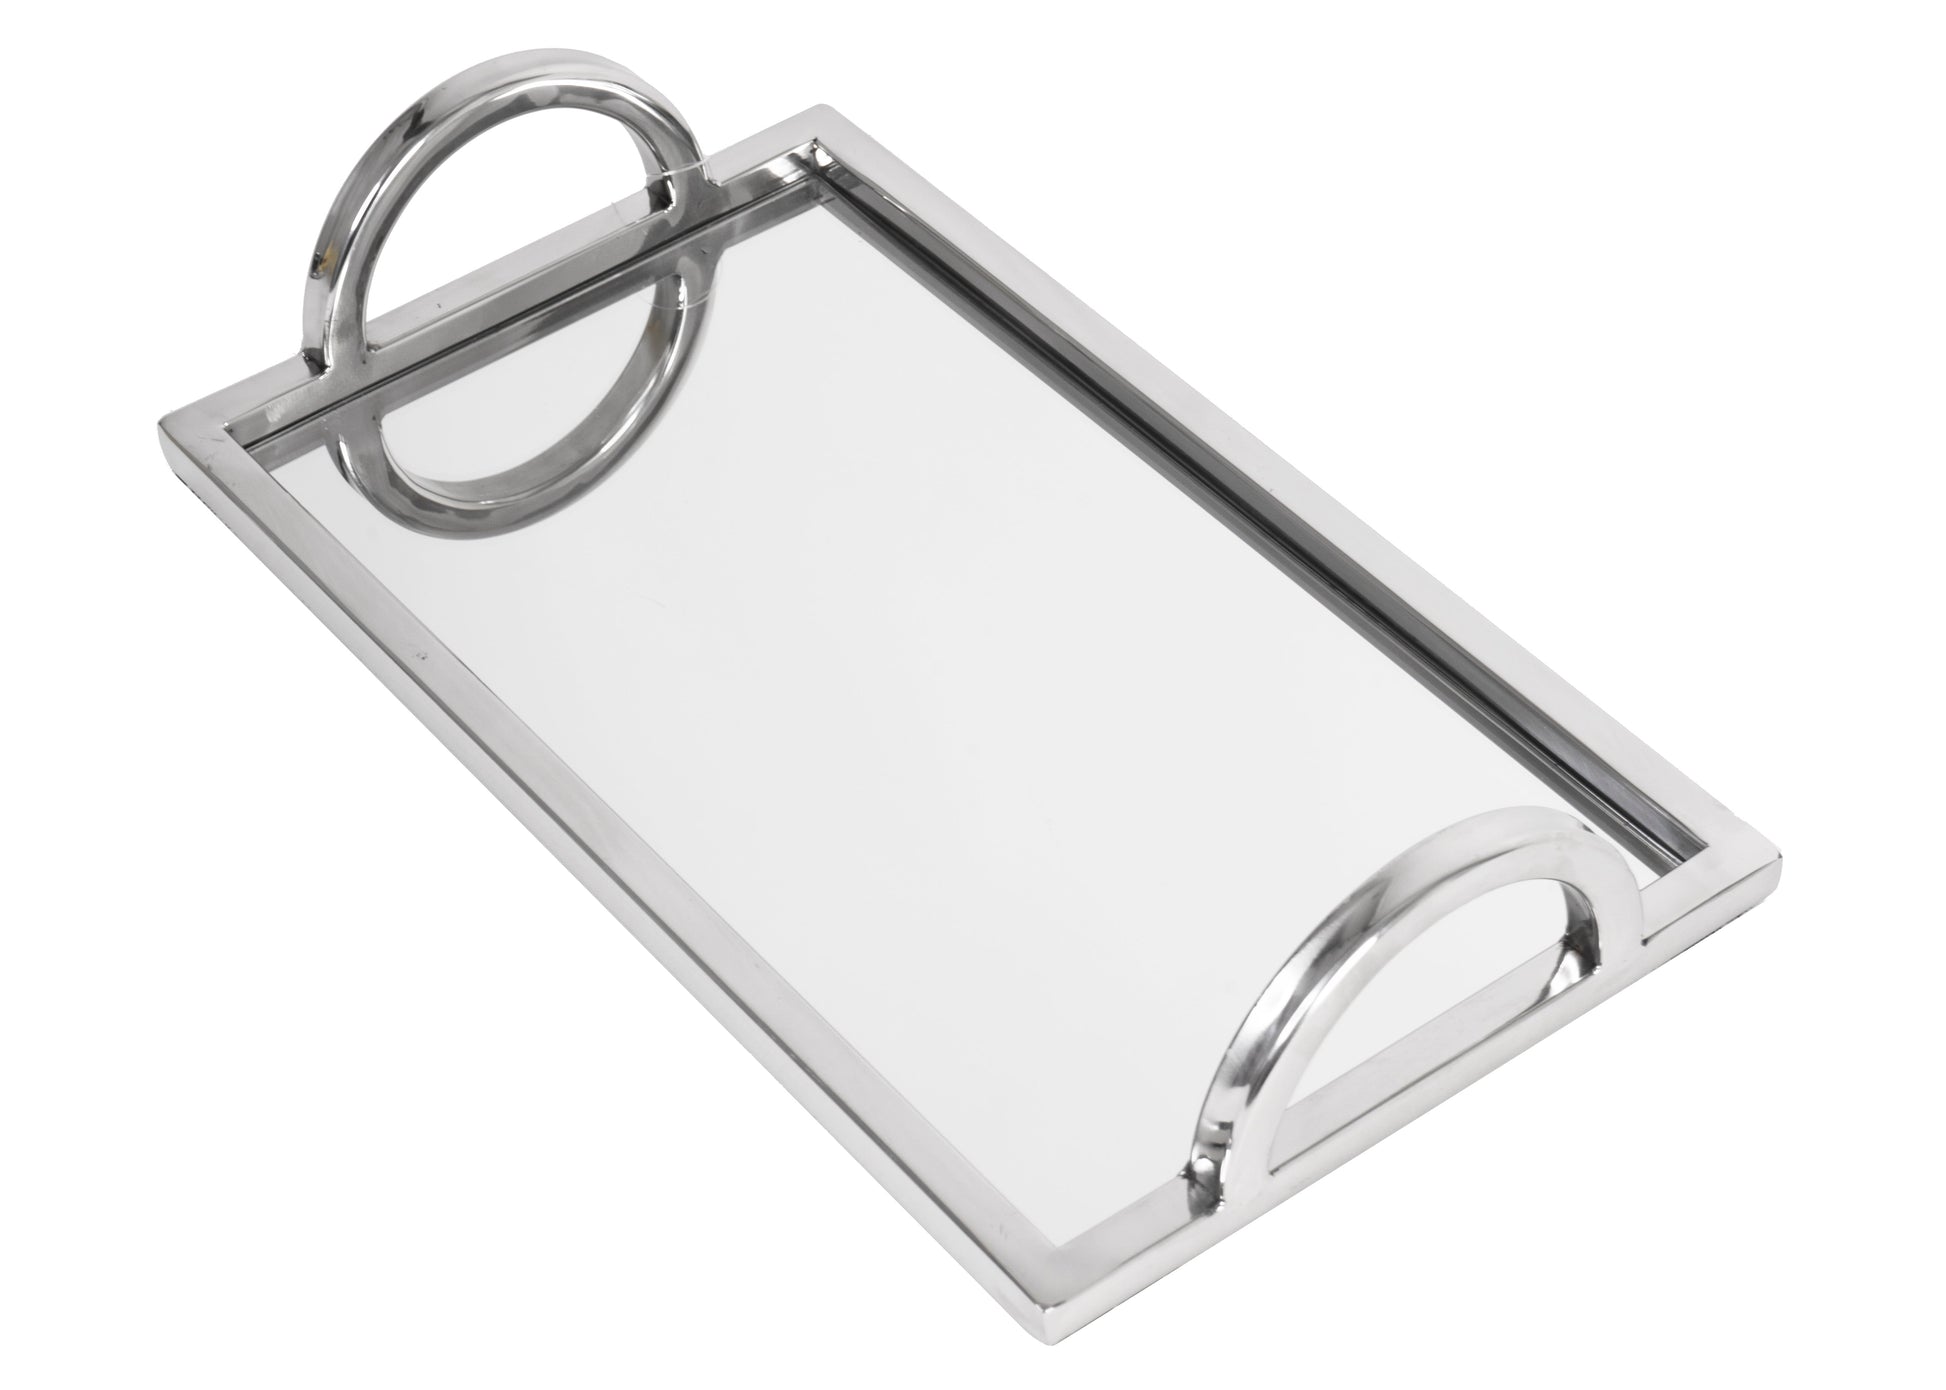 Mirror & Stainless Steel Tabletop Tray - Expo Home Decor